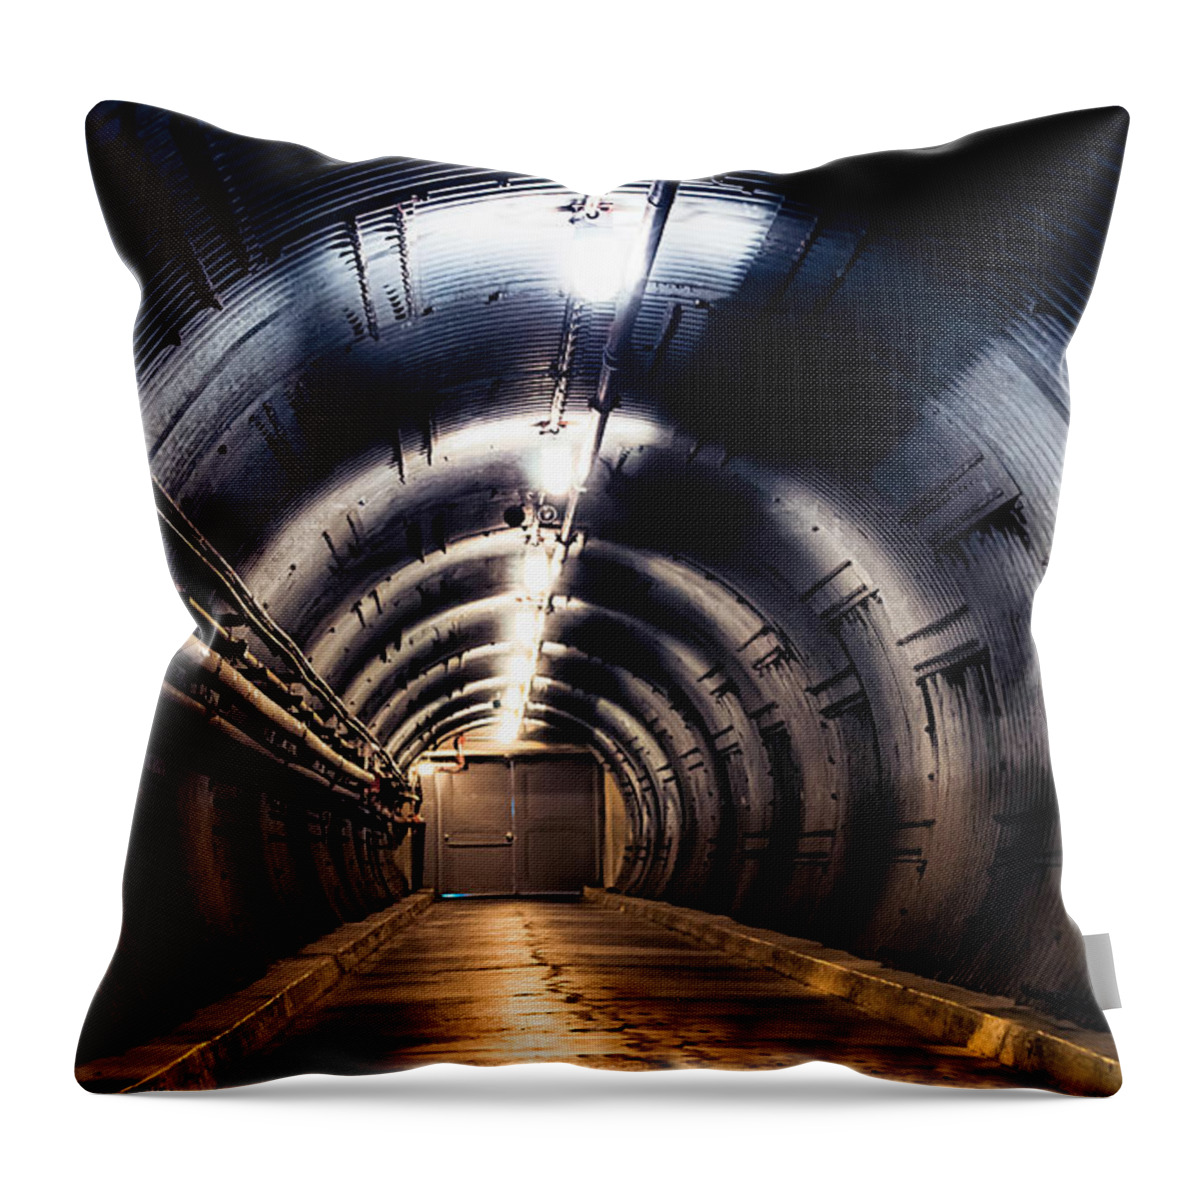 Diefenbunker Throw Pillow featuring the photograph Diefenbunker by Bianca Nadeau